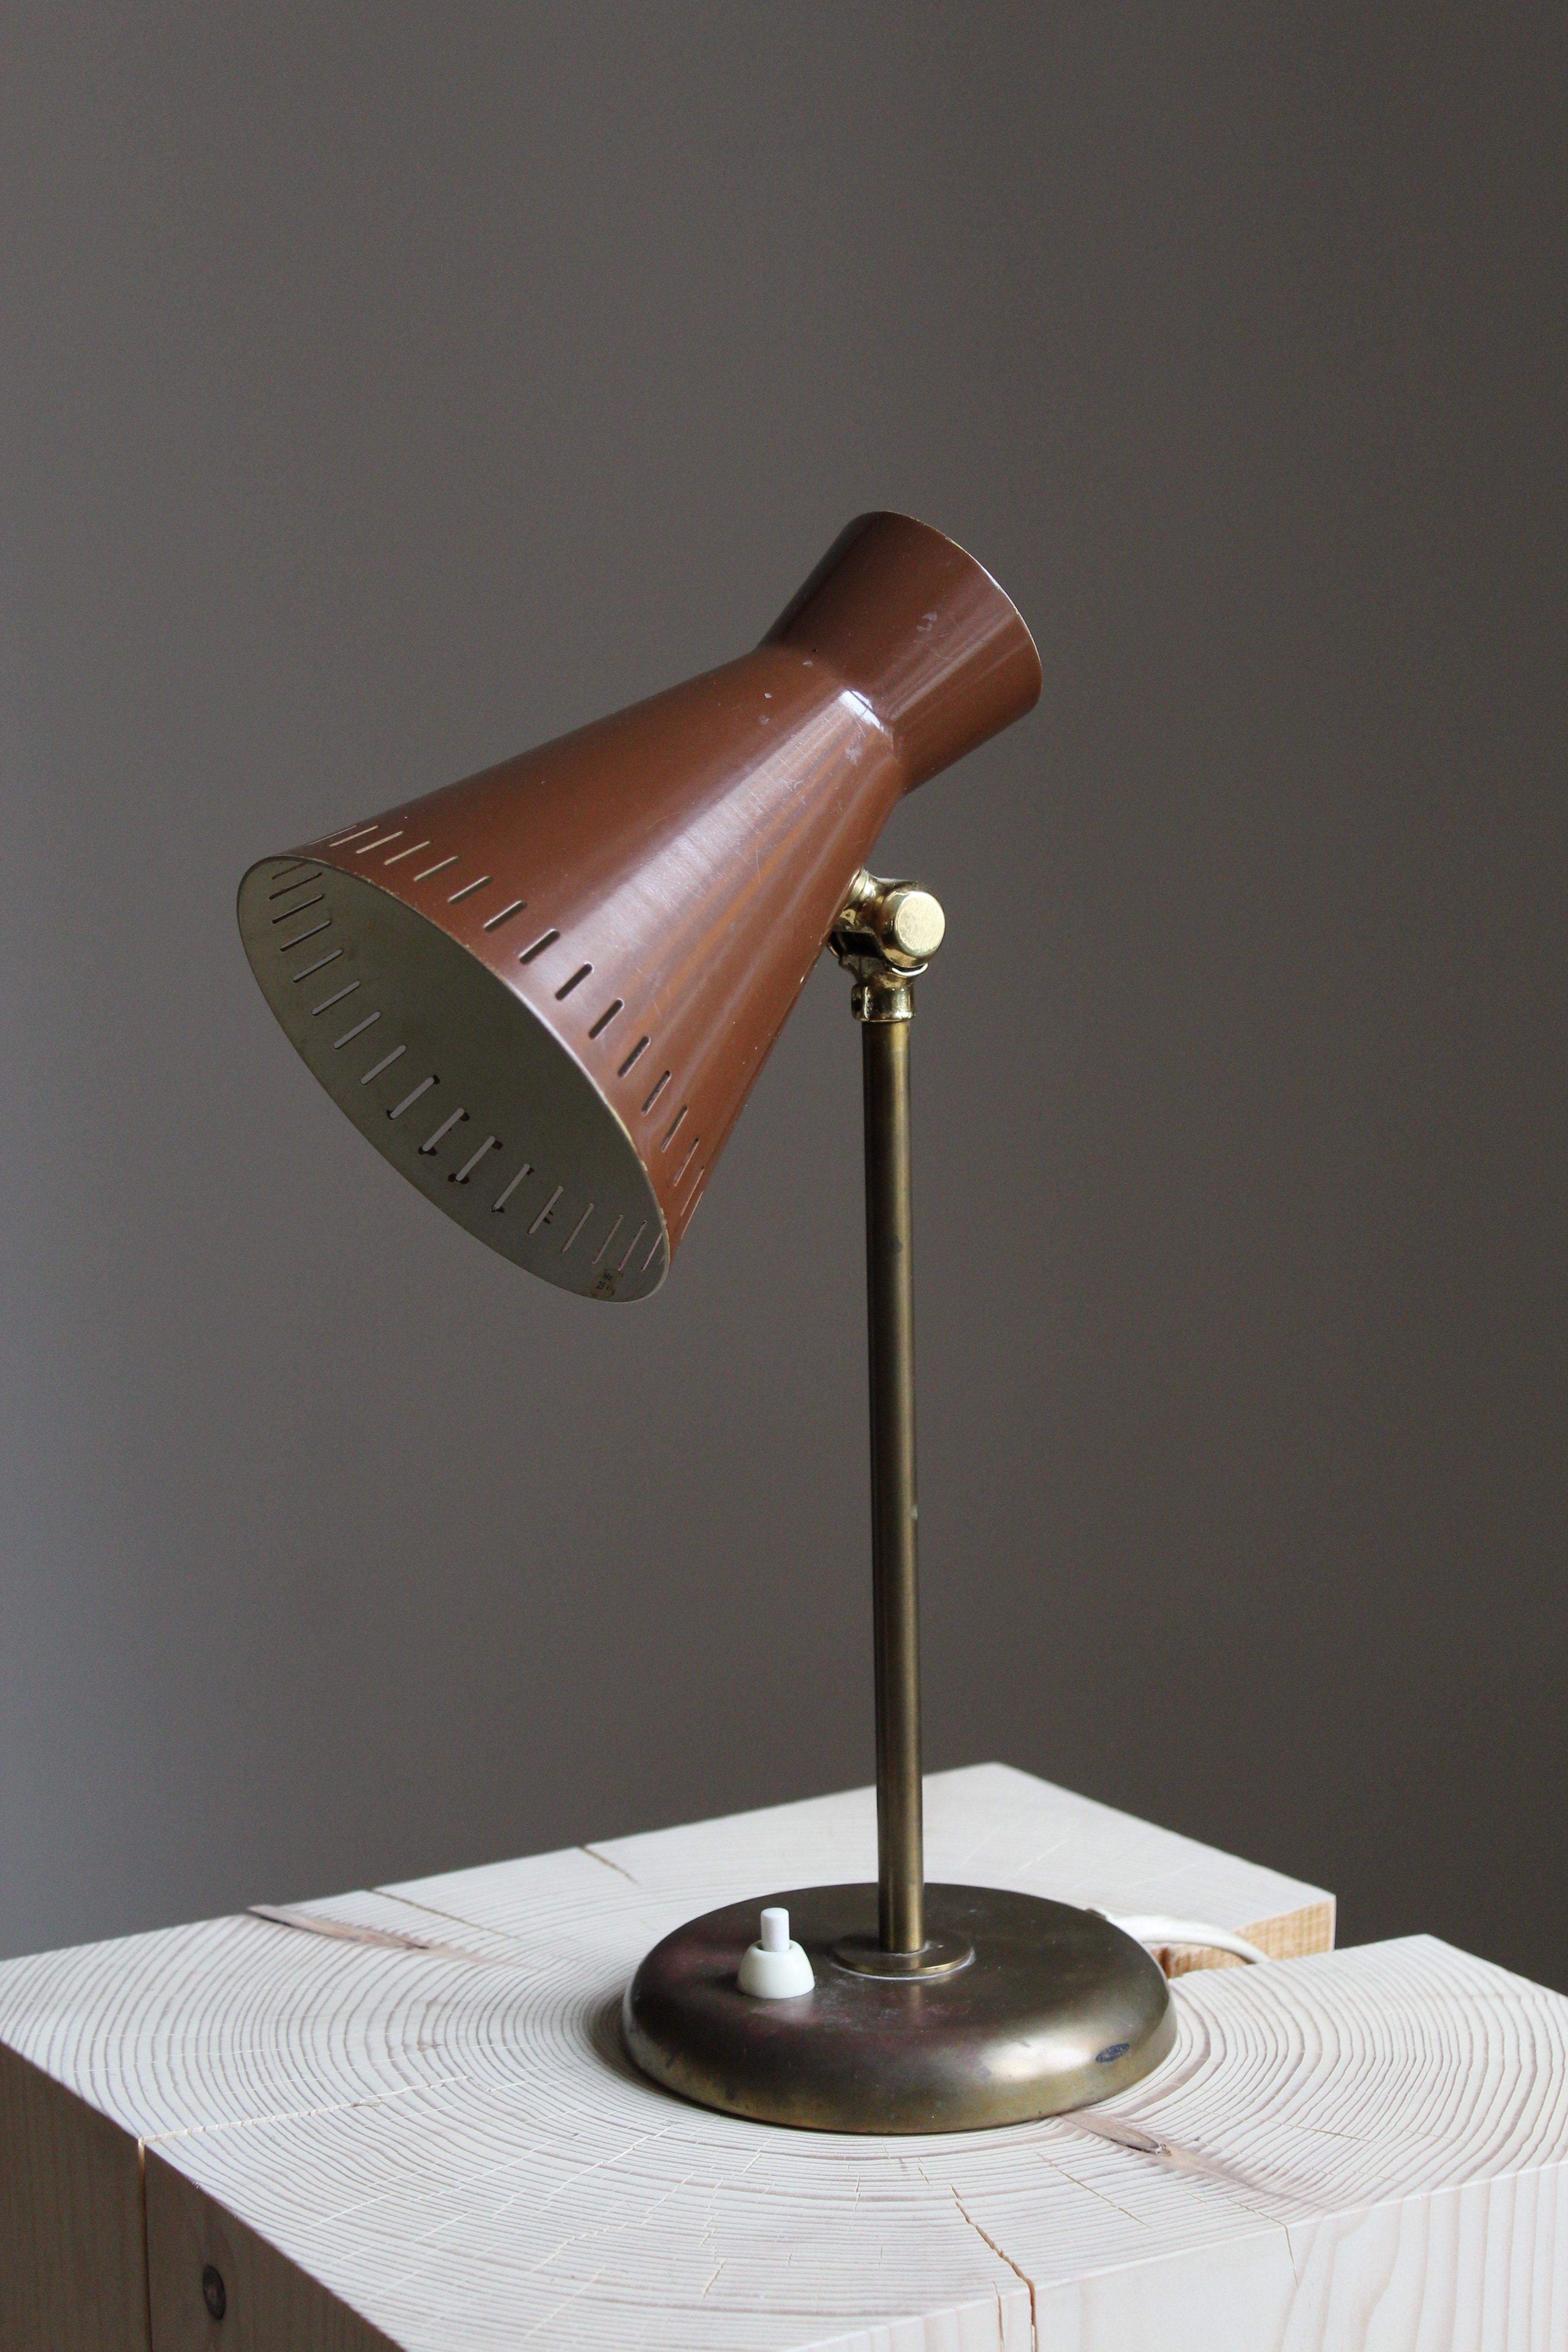 An adjustabe table lamp or desk light. In brass, screen in brown and white lacquered metal. Produced by Böhlmarks, Sweden, 1950s.

Other designers of the period include Josef Frank, Paavo Tynell, Hans Bergström, Böhlmarks, and Jean Royère.